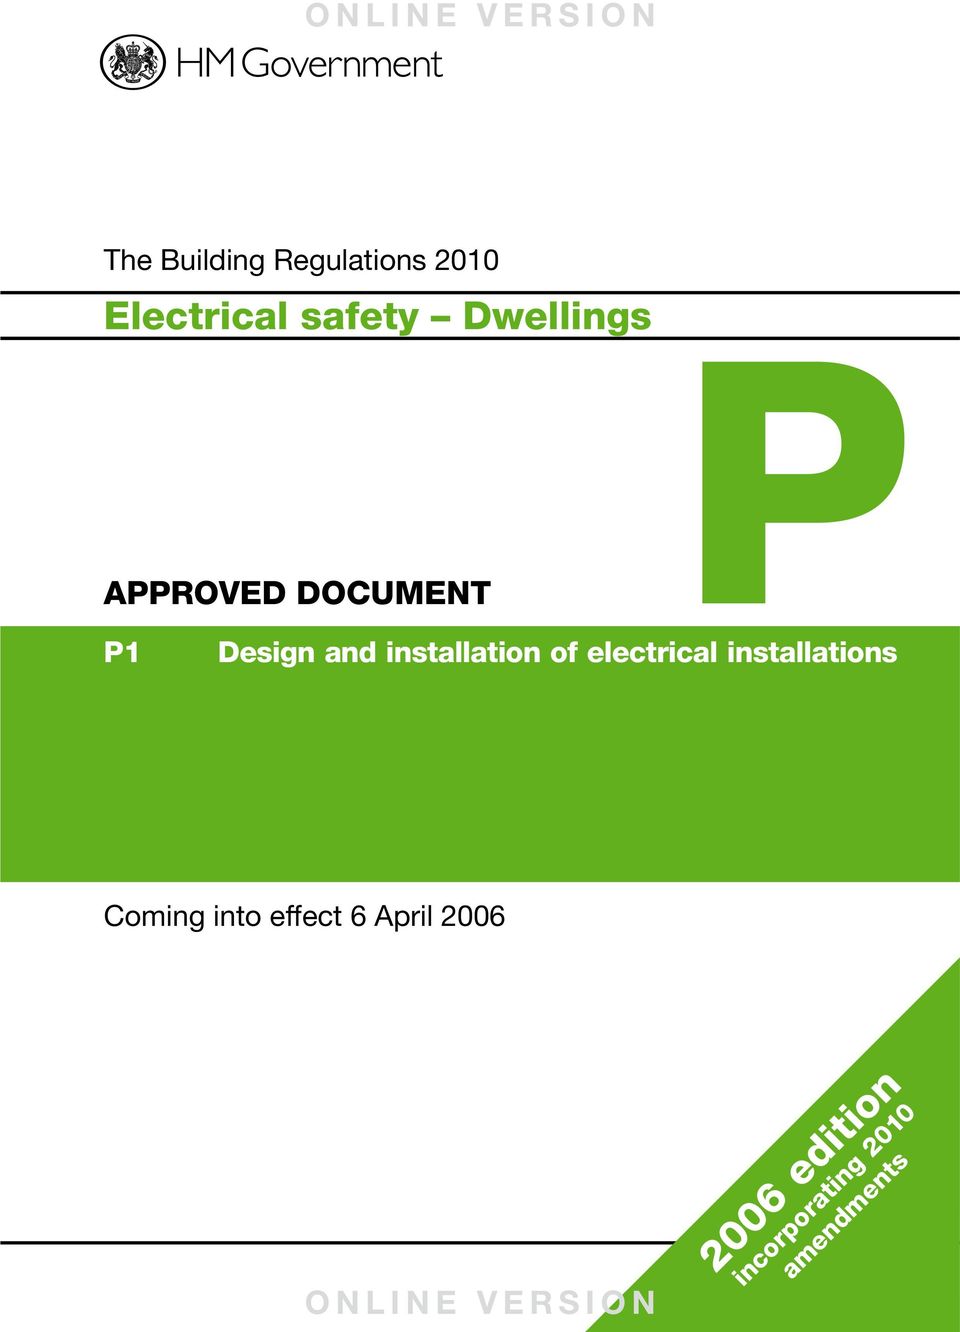 com/buildingregs The Building Regulations 2010 Electrical safety Dwellings AROVED DOCUMENT RIBA Bookshops RIBA, 66 ortland lace, London WIB 1AD.